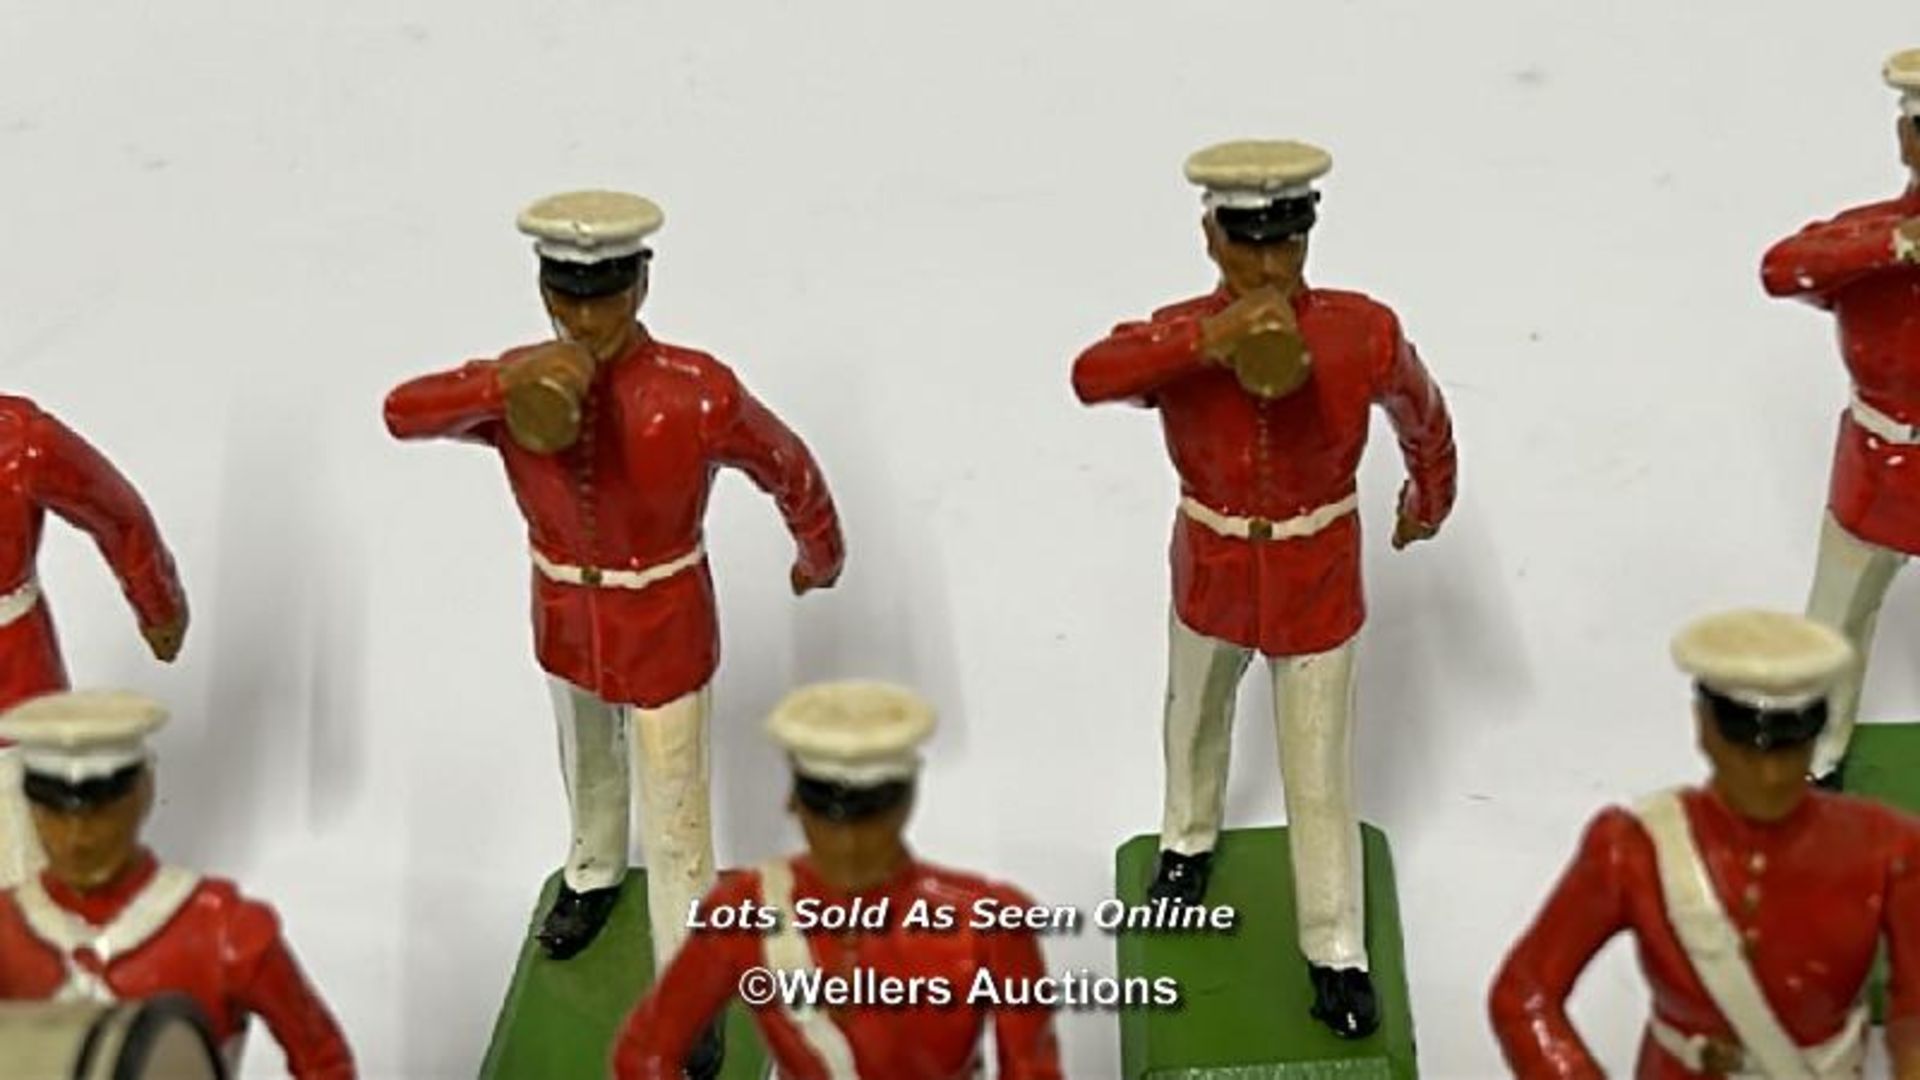 Britain's "Dorset U.S. Marine corps" marching band, sixteen figures, 1987 / AN5 - Image 7 of 8